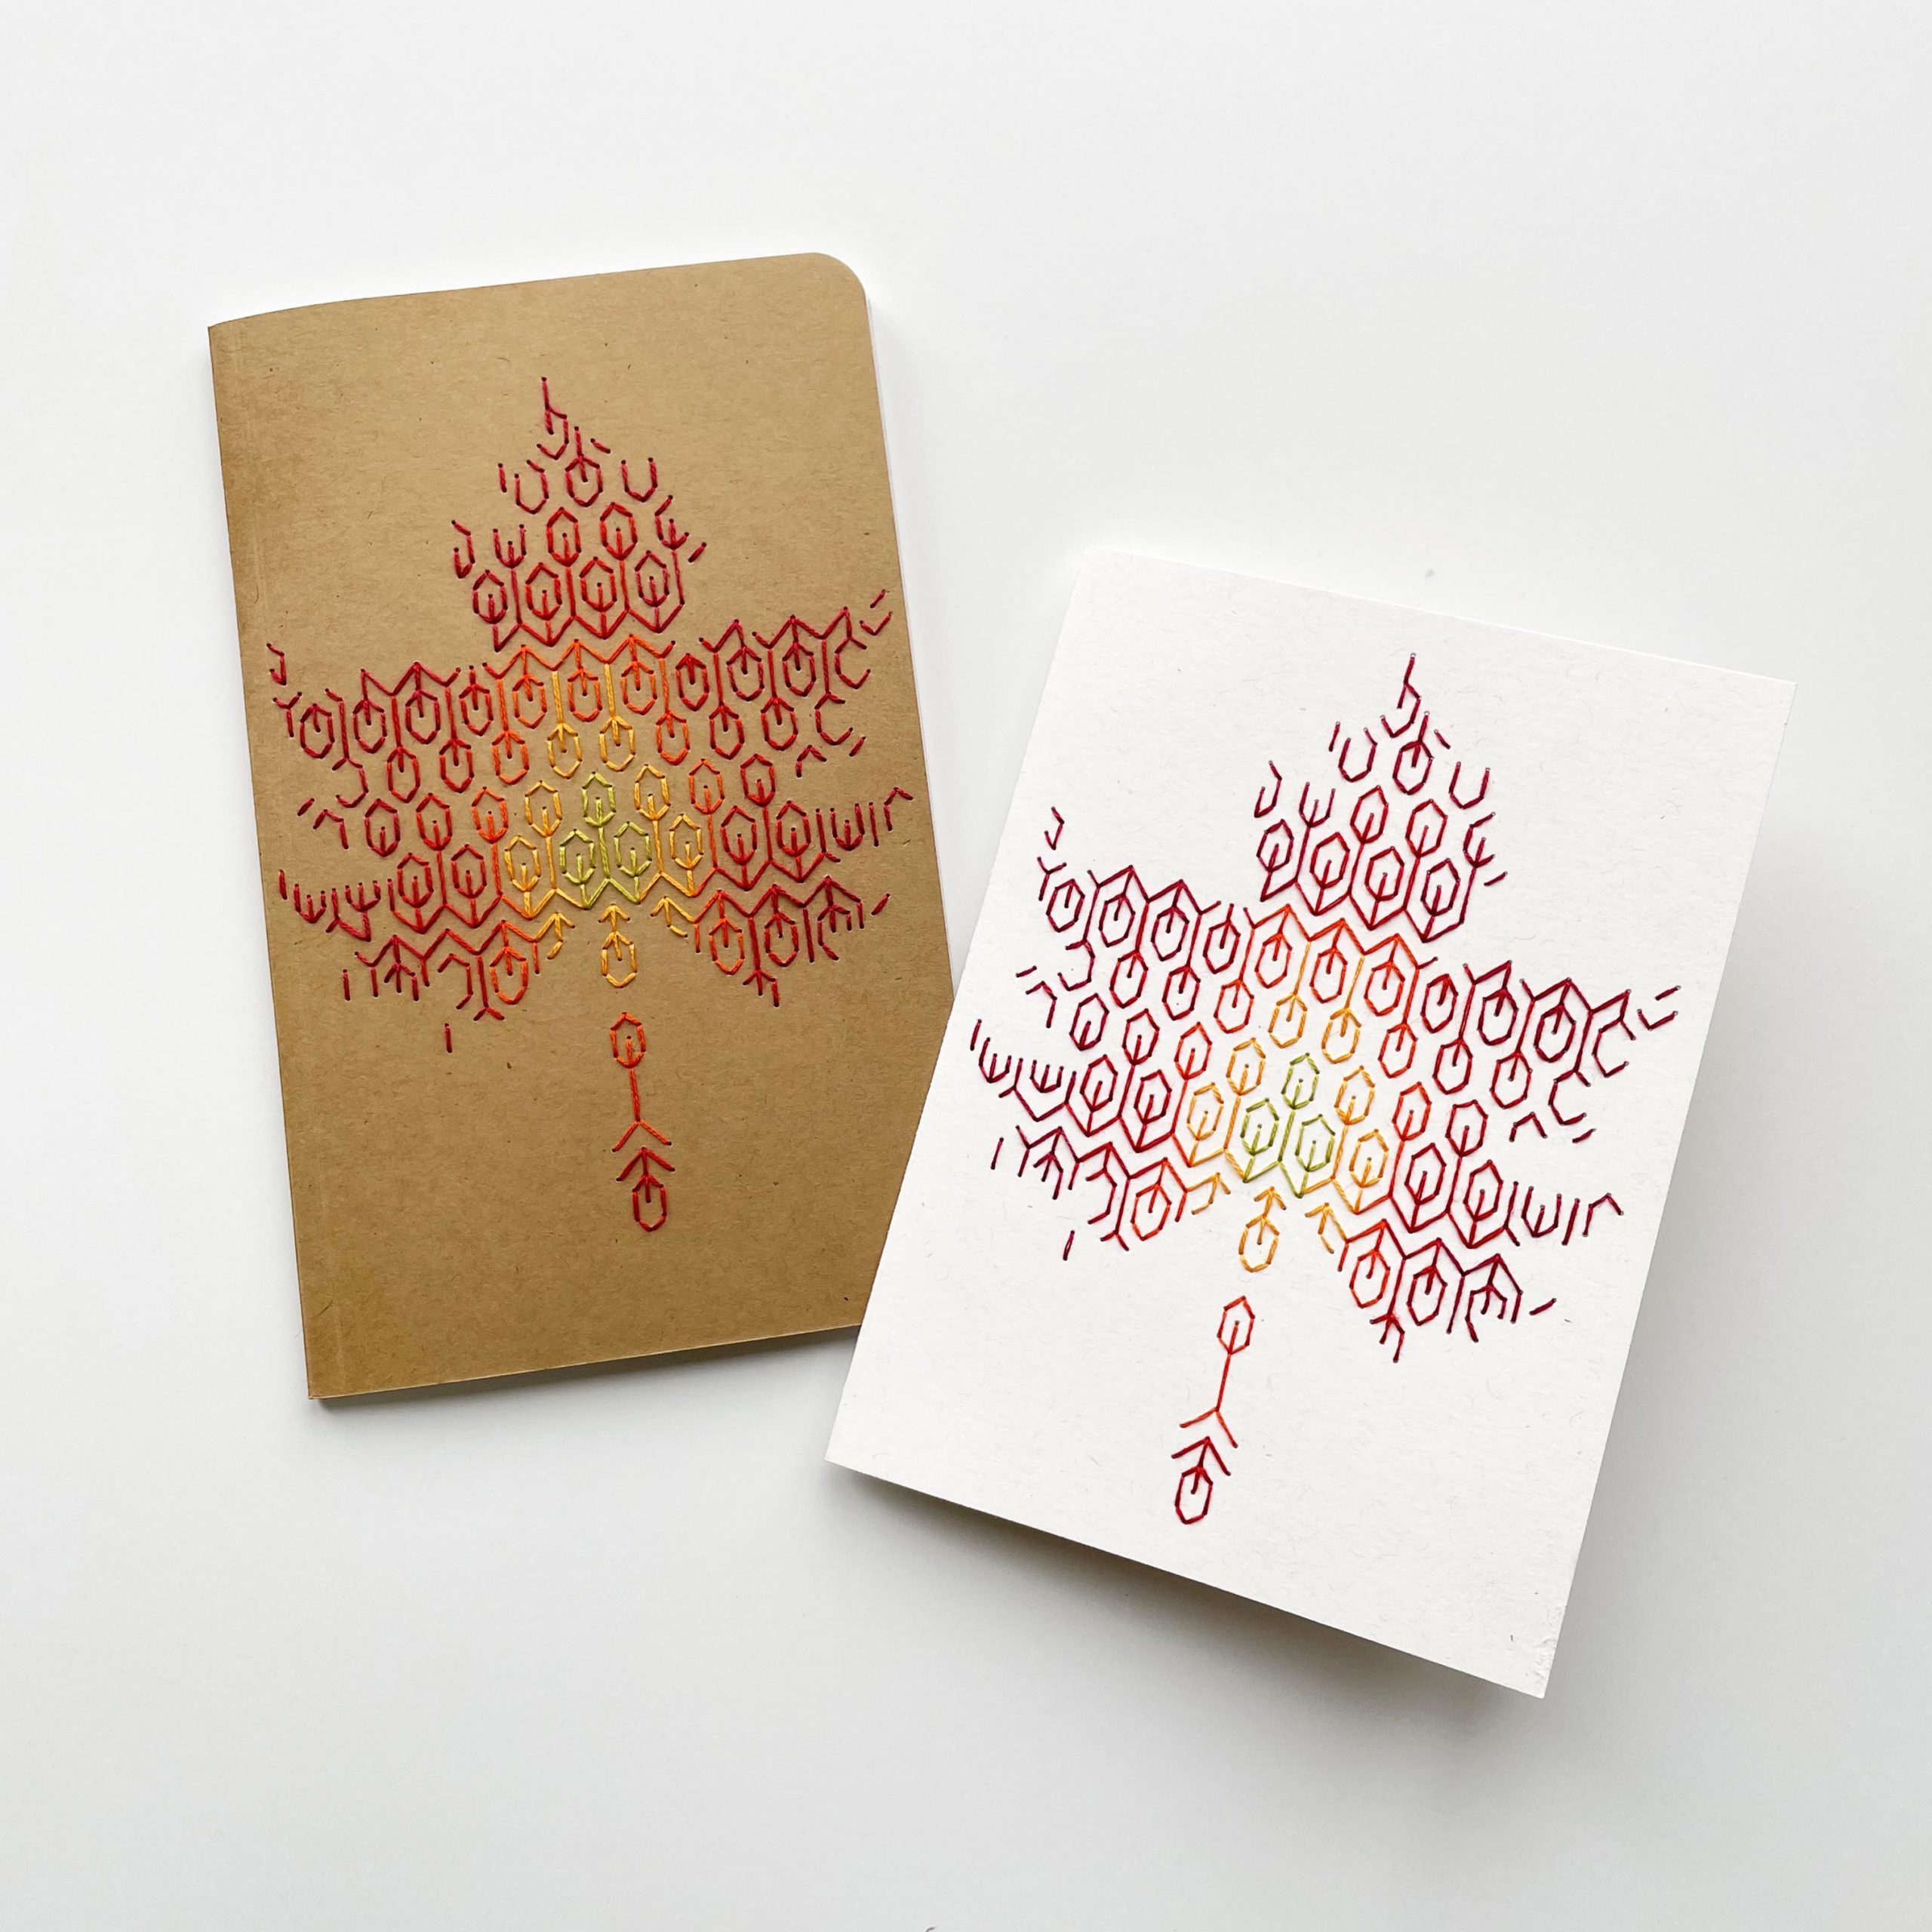 https://maydel.com/wp-content/uploads/Fall-Foliage-autumn-leaf-paper-embroidery-on-notebook-journal-greeting-card-notecard-scaled.jpg